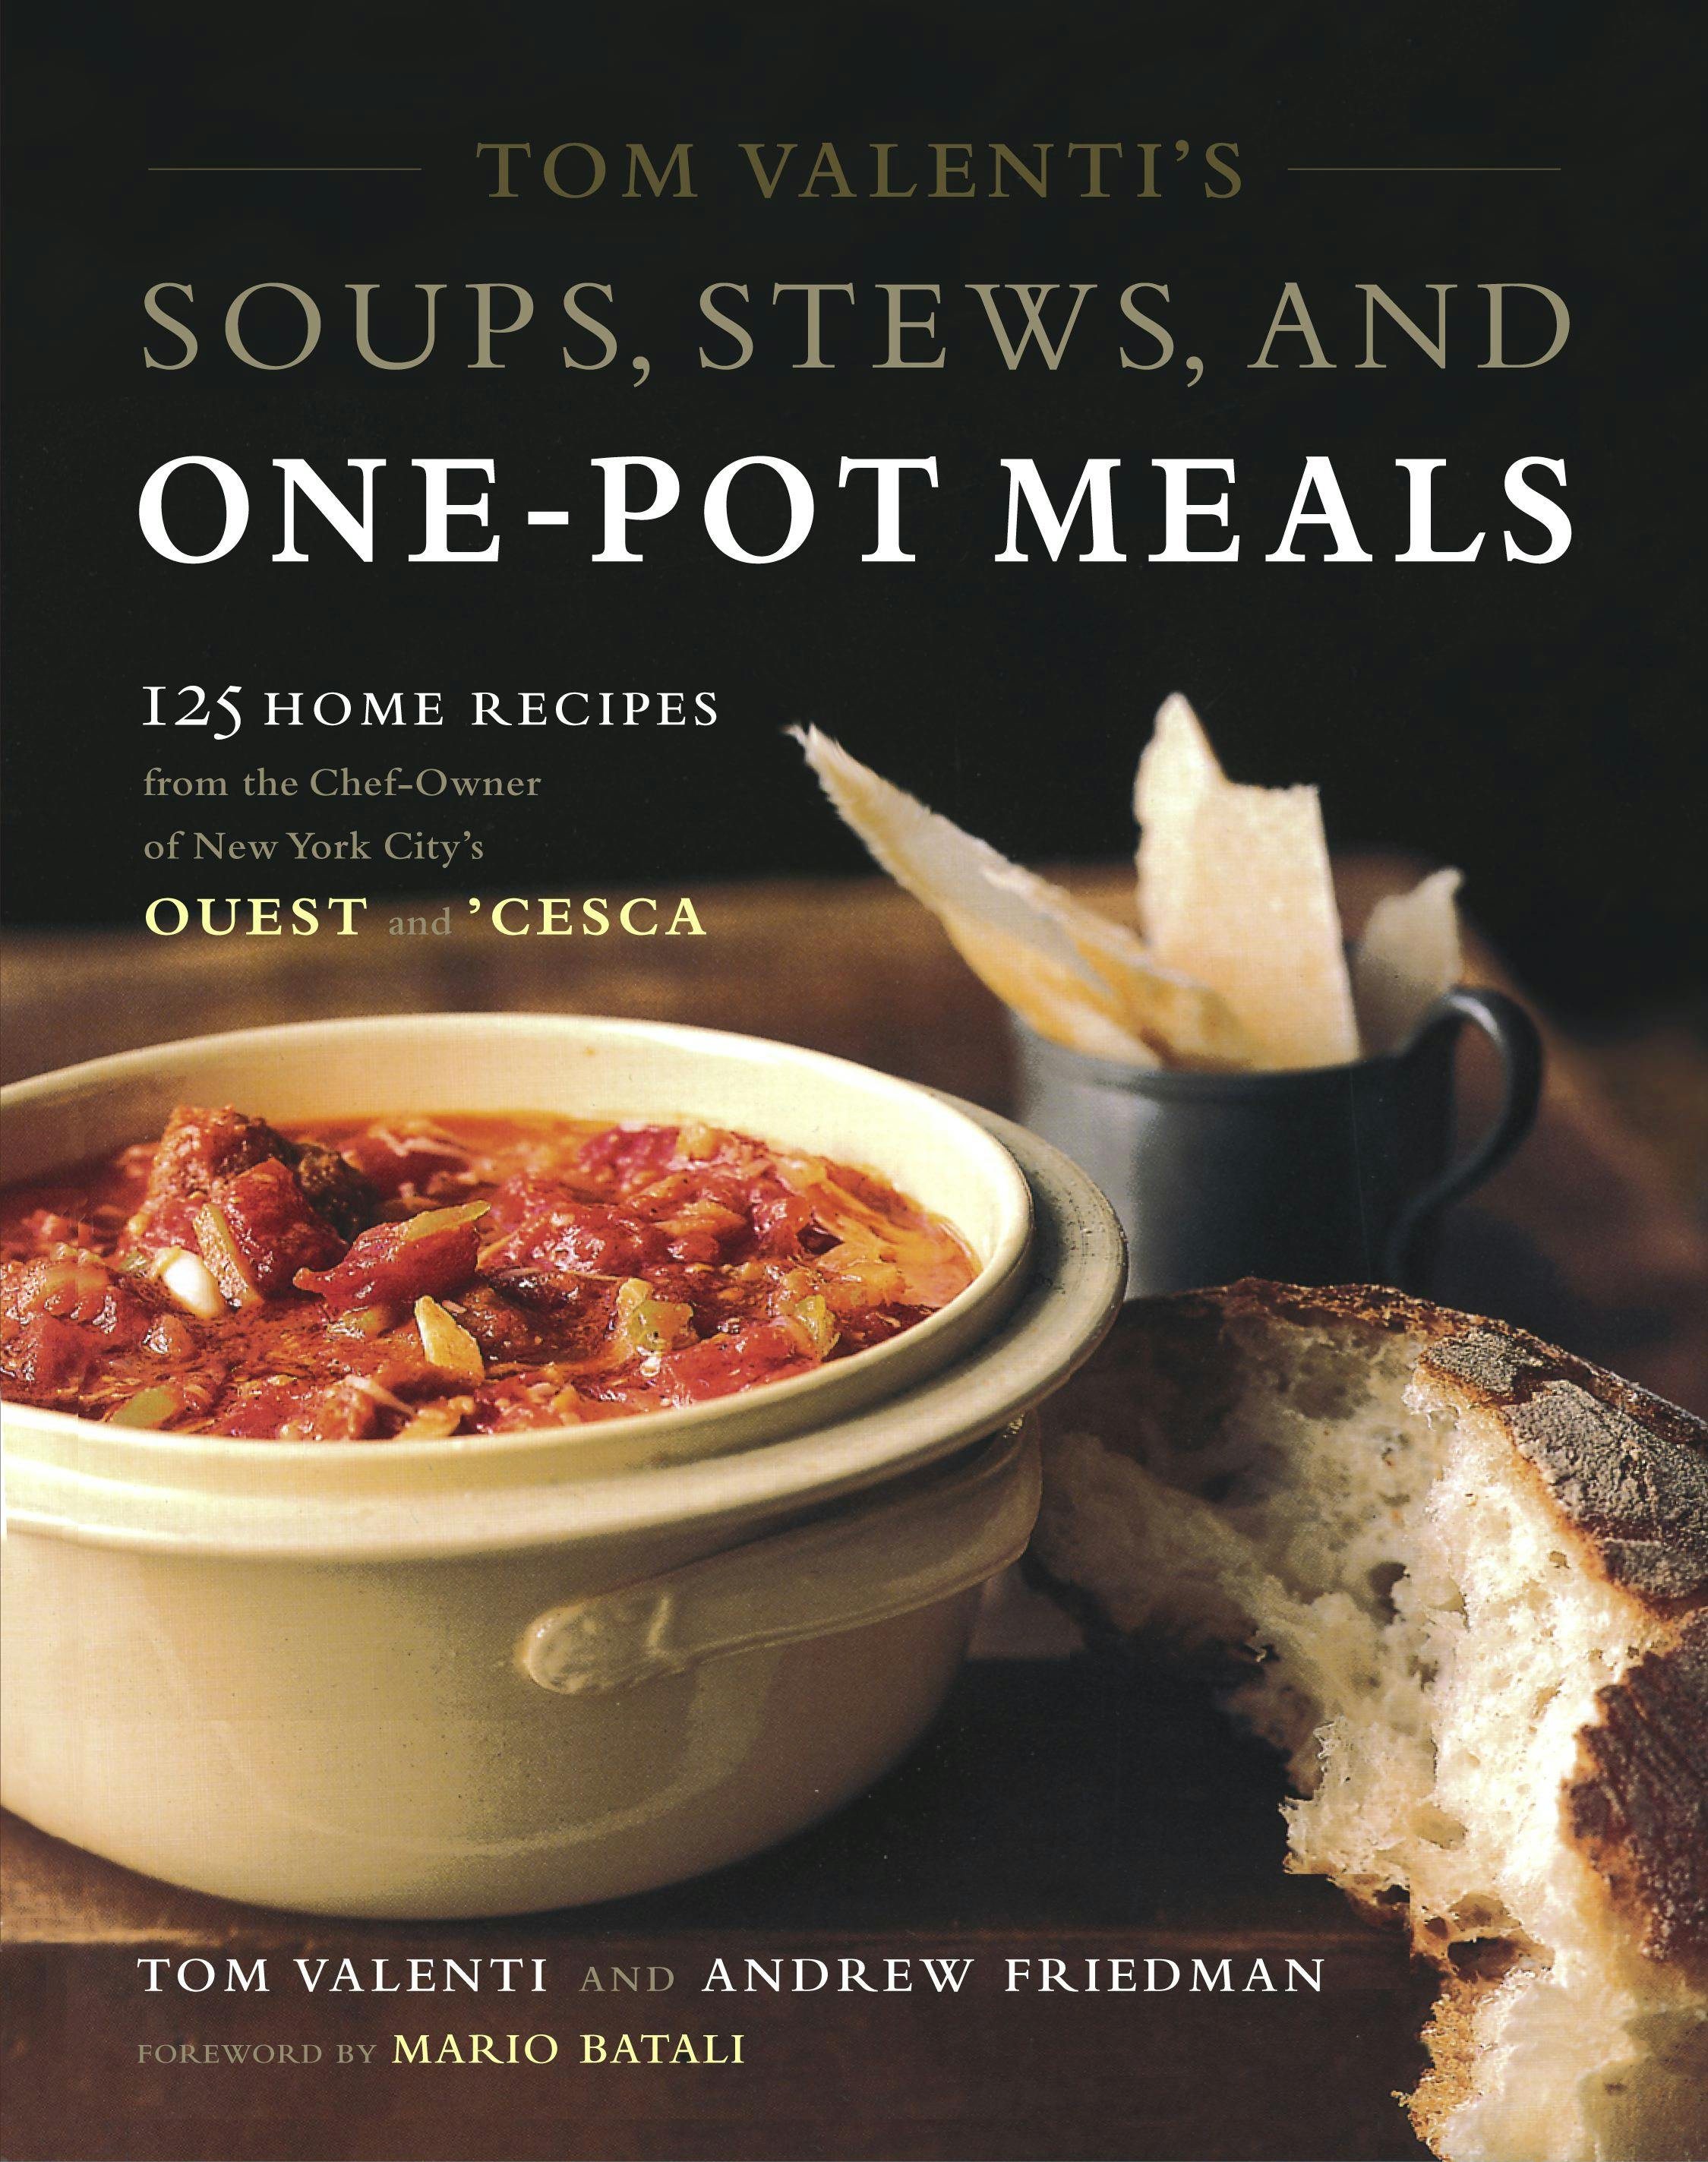 Tom Valenti's Soups, Stews, and One-Pot Meals: 125 Home Recipes from the Chef-Owner of New York City's Ouest and 'Cesca - Tom Valenti, Andrew Friedman